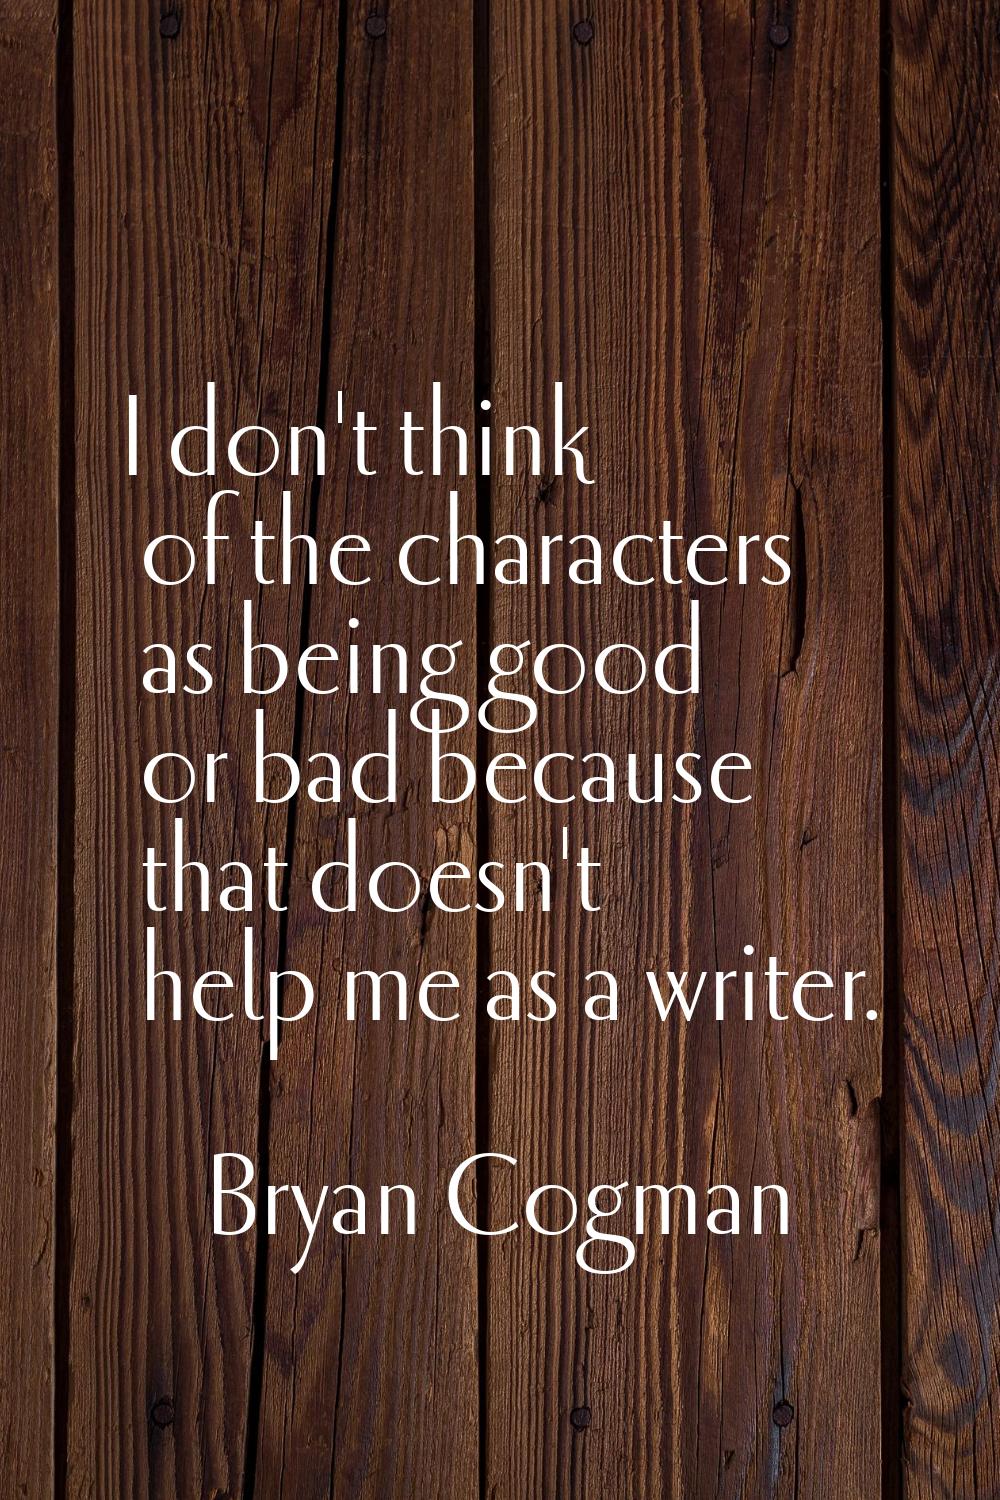 I don't think of the characters as being good or bad because that doesn't help me as a writer.